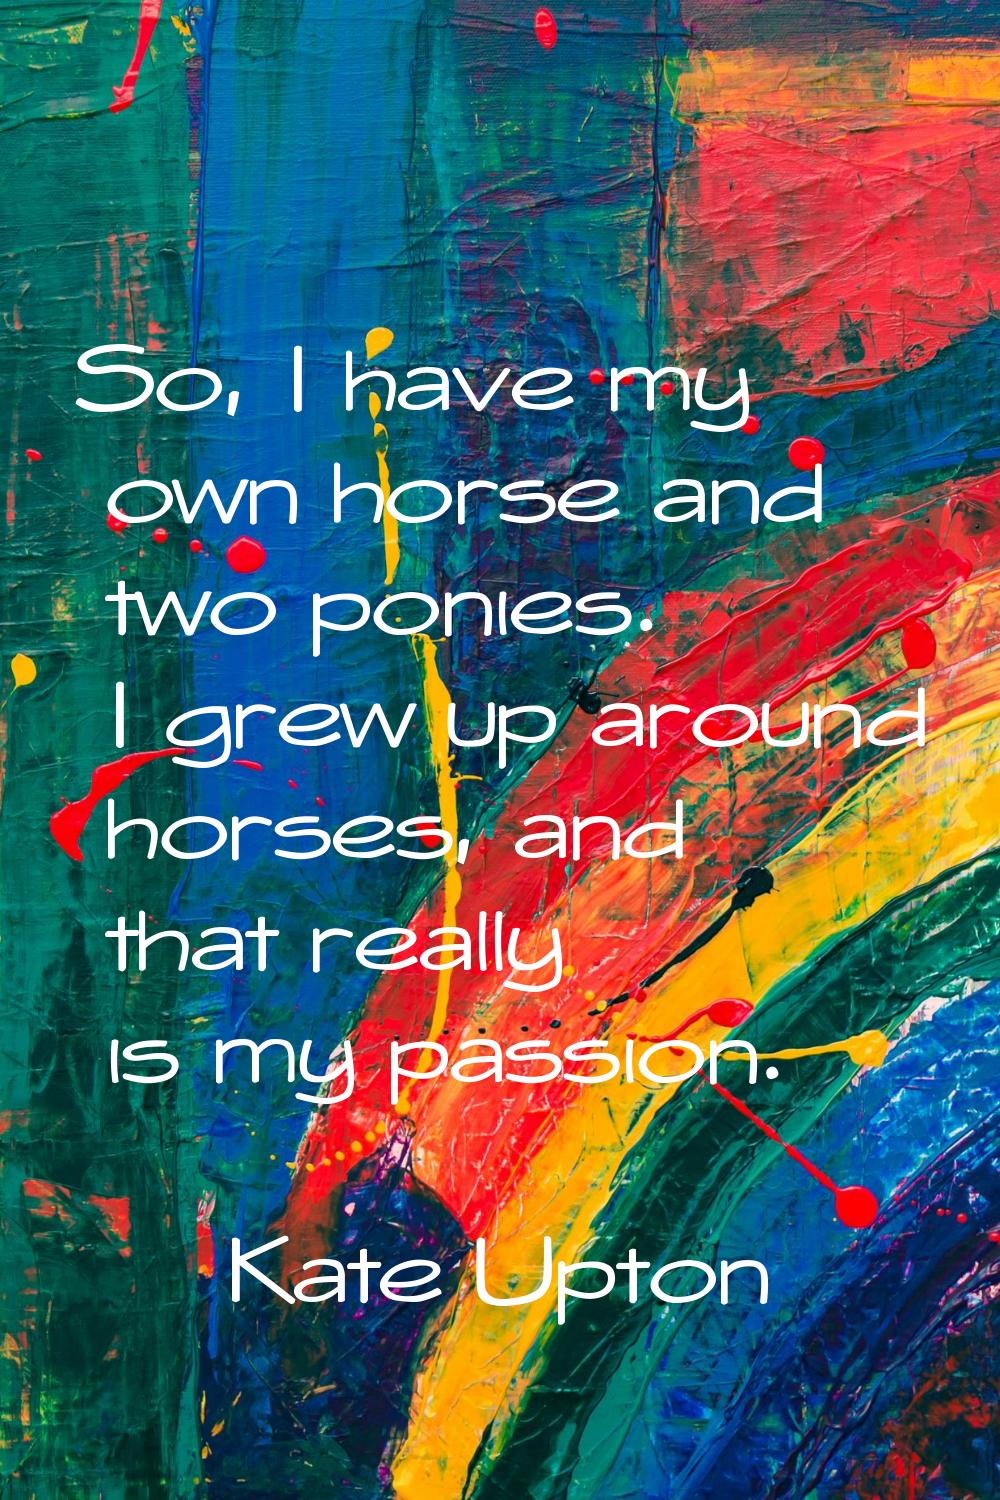 So, I have my own horse and two ponies. I grew up around horses, and that really is my passion.